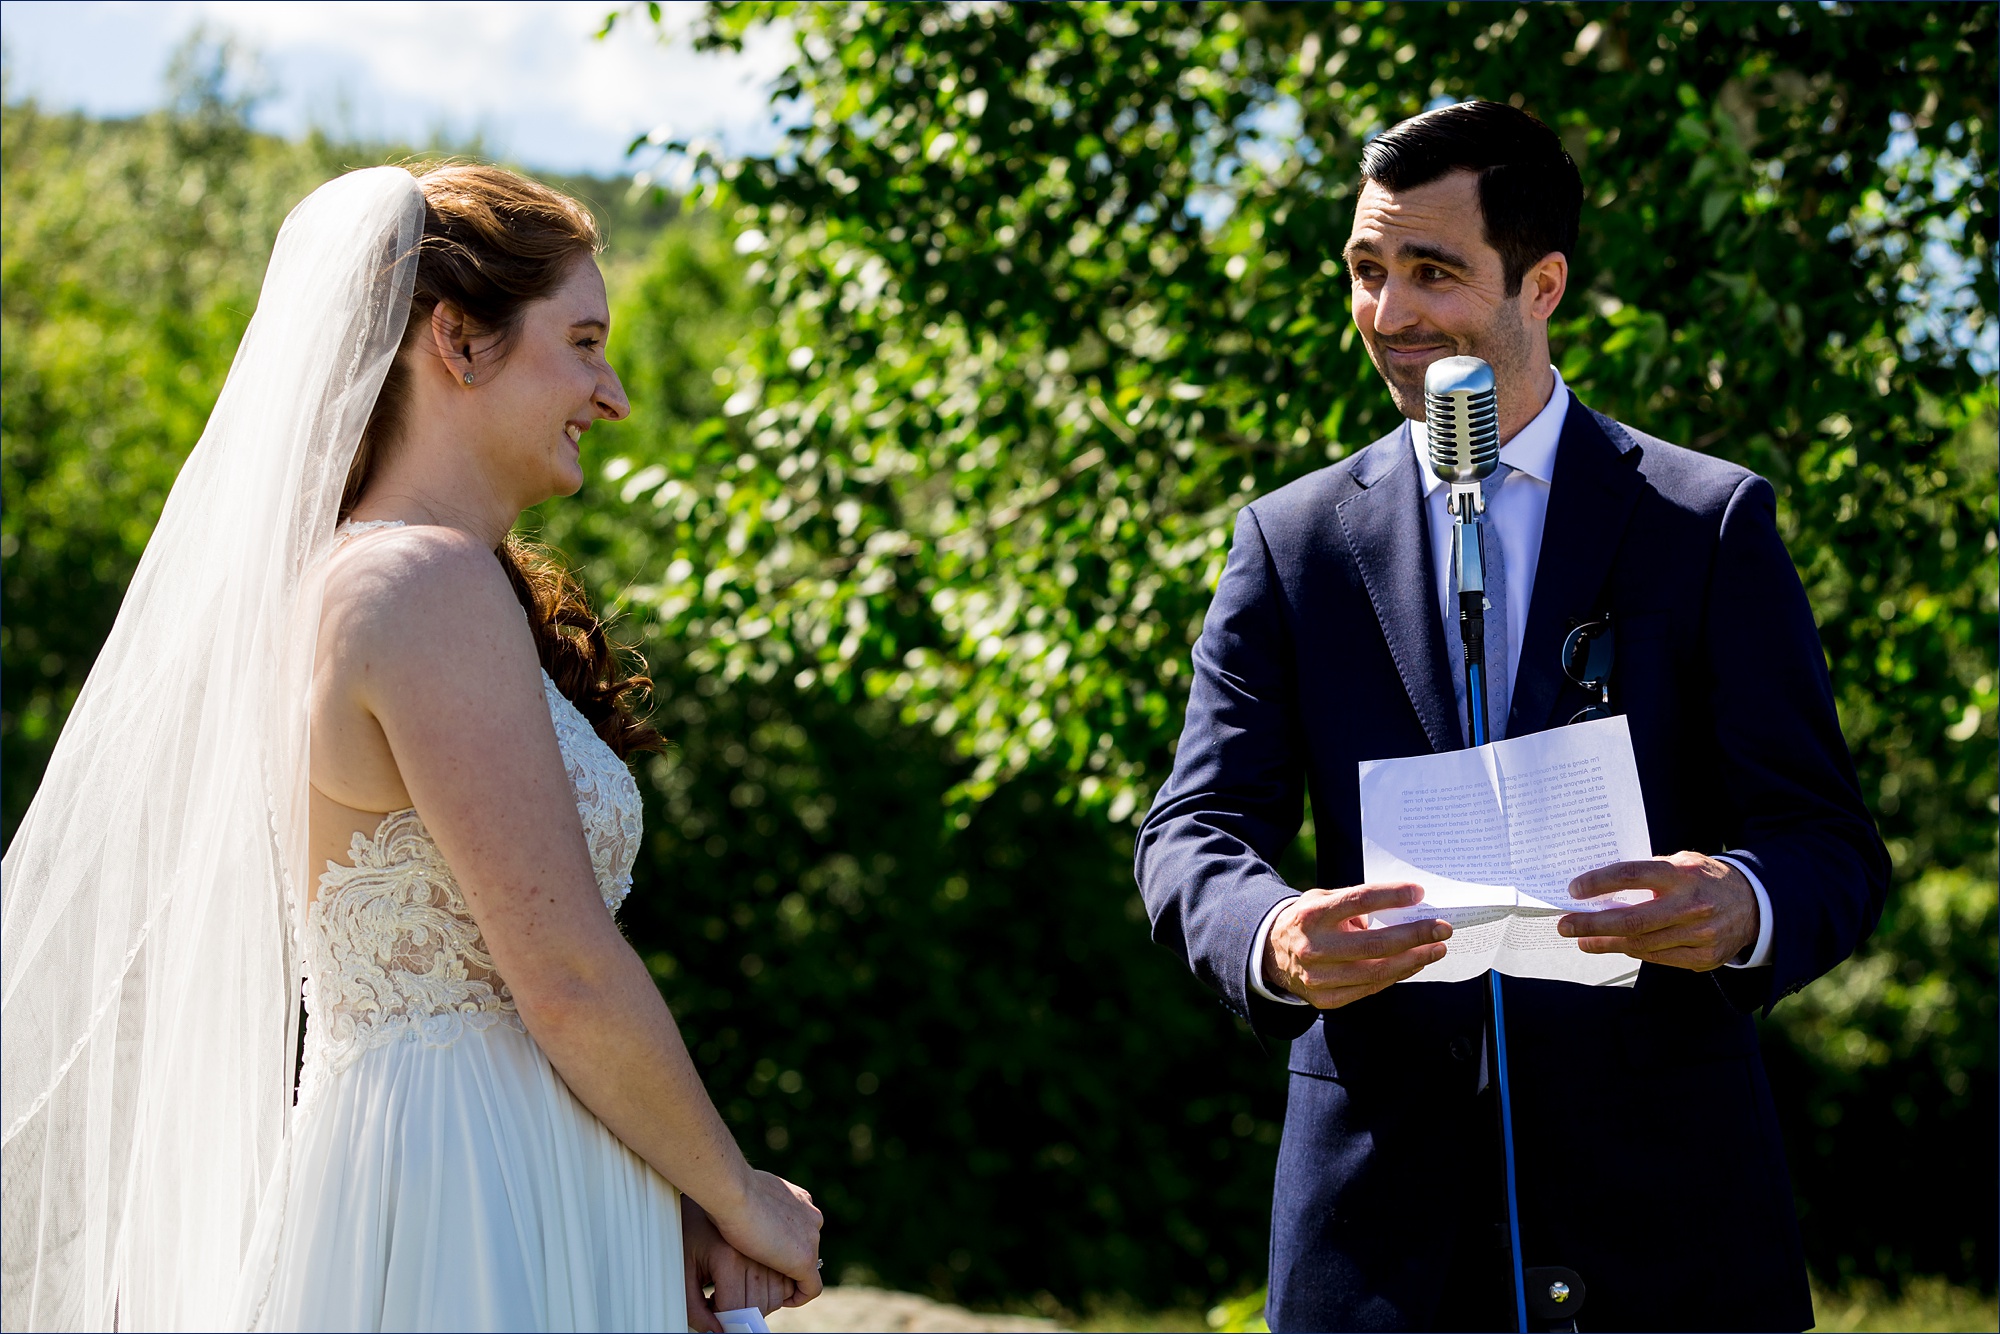 The groom smiles warmly at the bride at their Strafford NH wedding